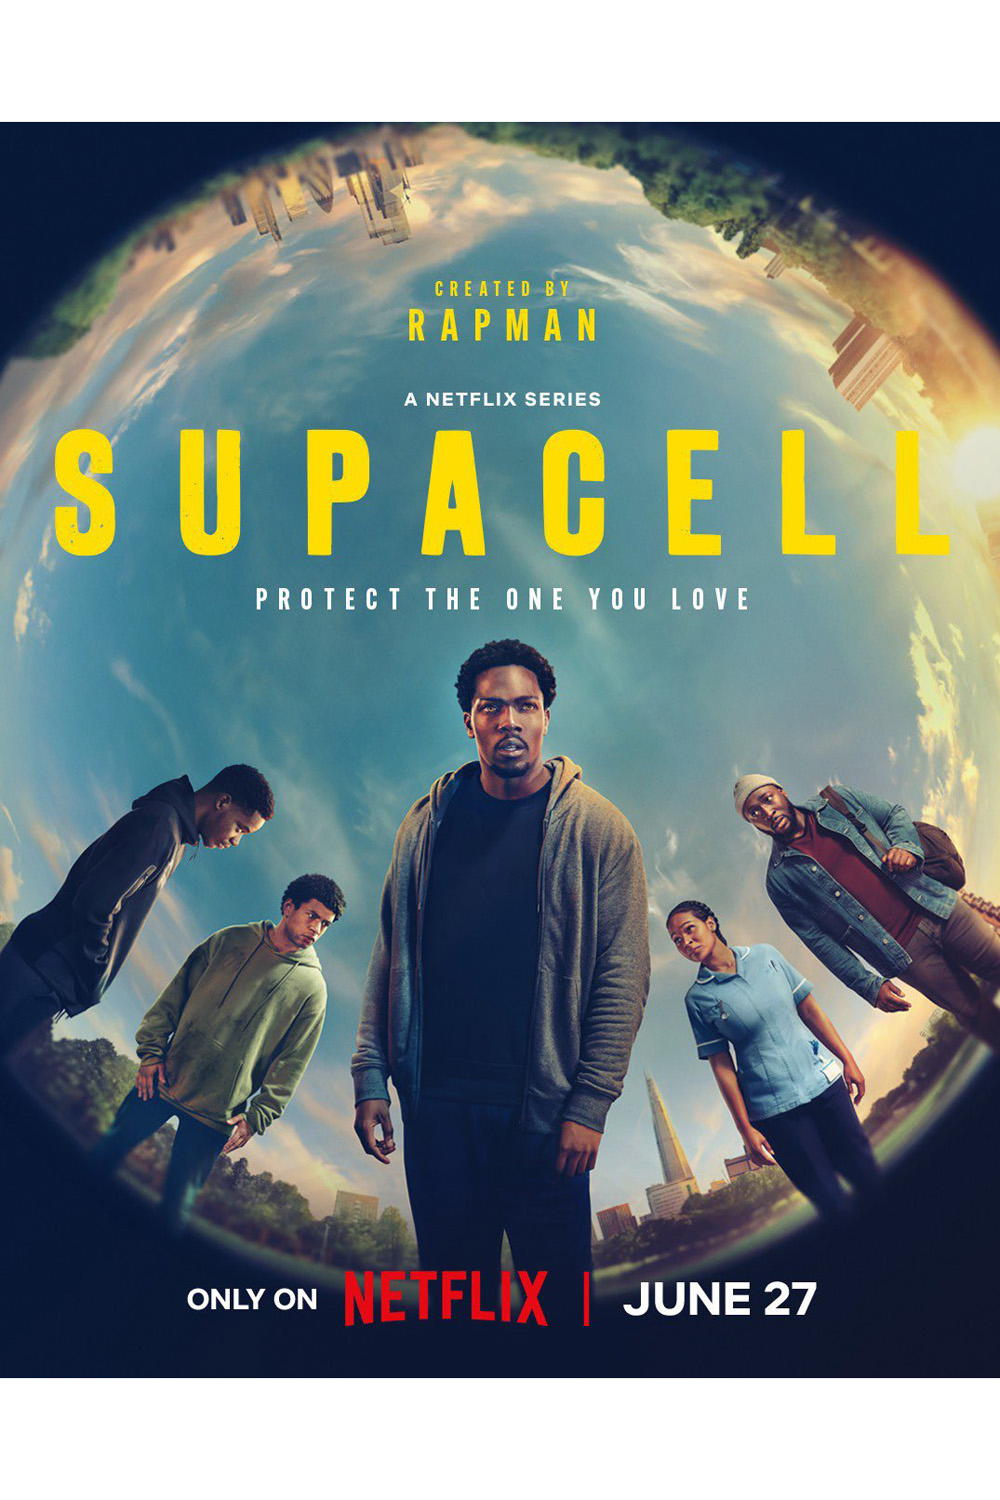 Will There Be A Second Series Of Supacell?